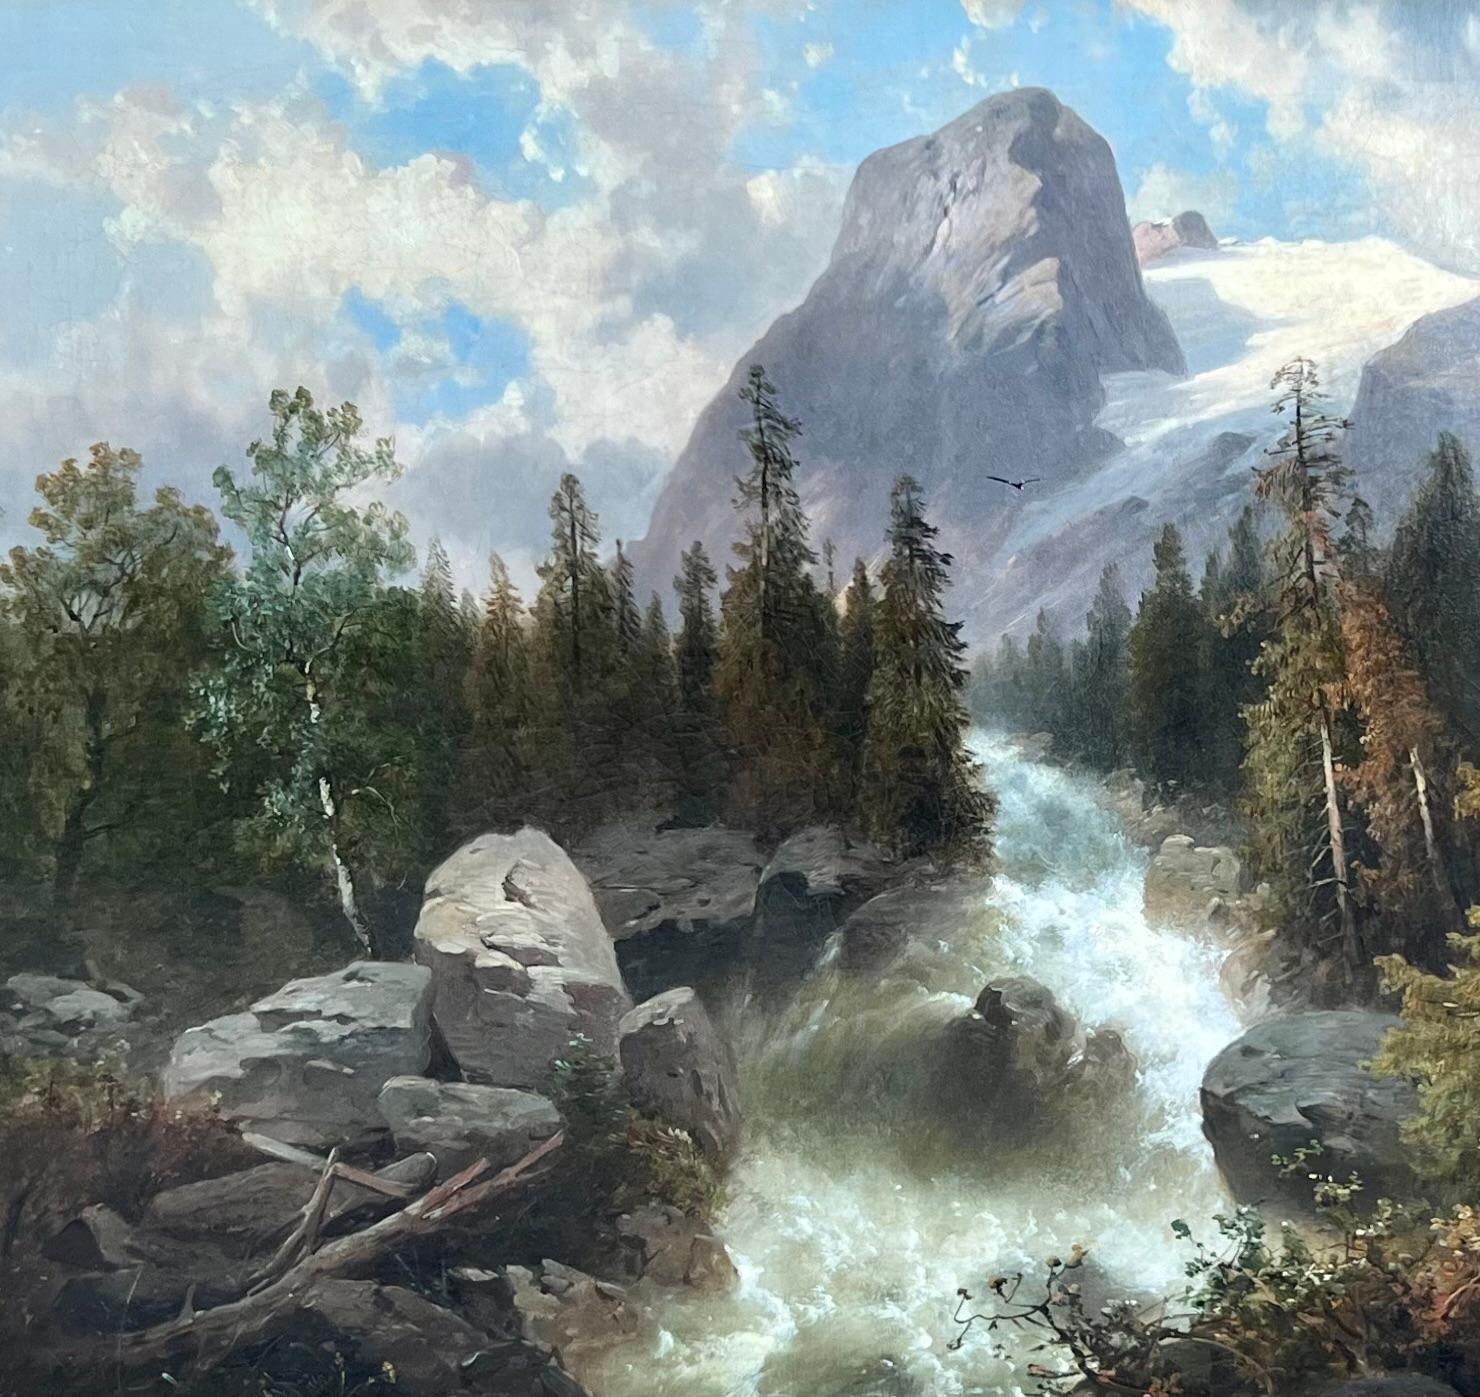 Oil on canvas, signed lower right featuring a swift moving river down the side of a mountainous landscape. 

Josef Thoma, son of Josef Thoma father (Vienna 1800-?) was born September 28, 1828 in Vienna.

He was probably trained by his father